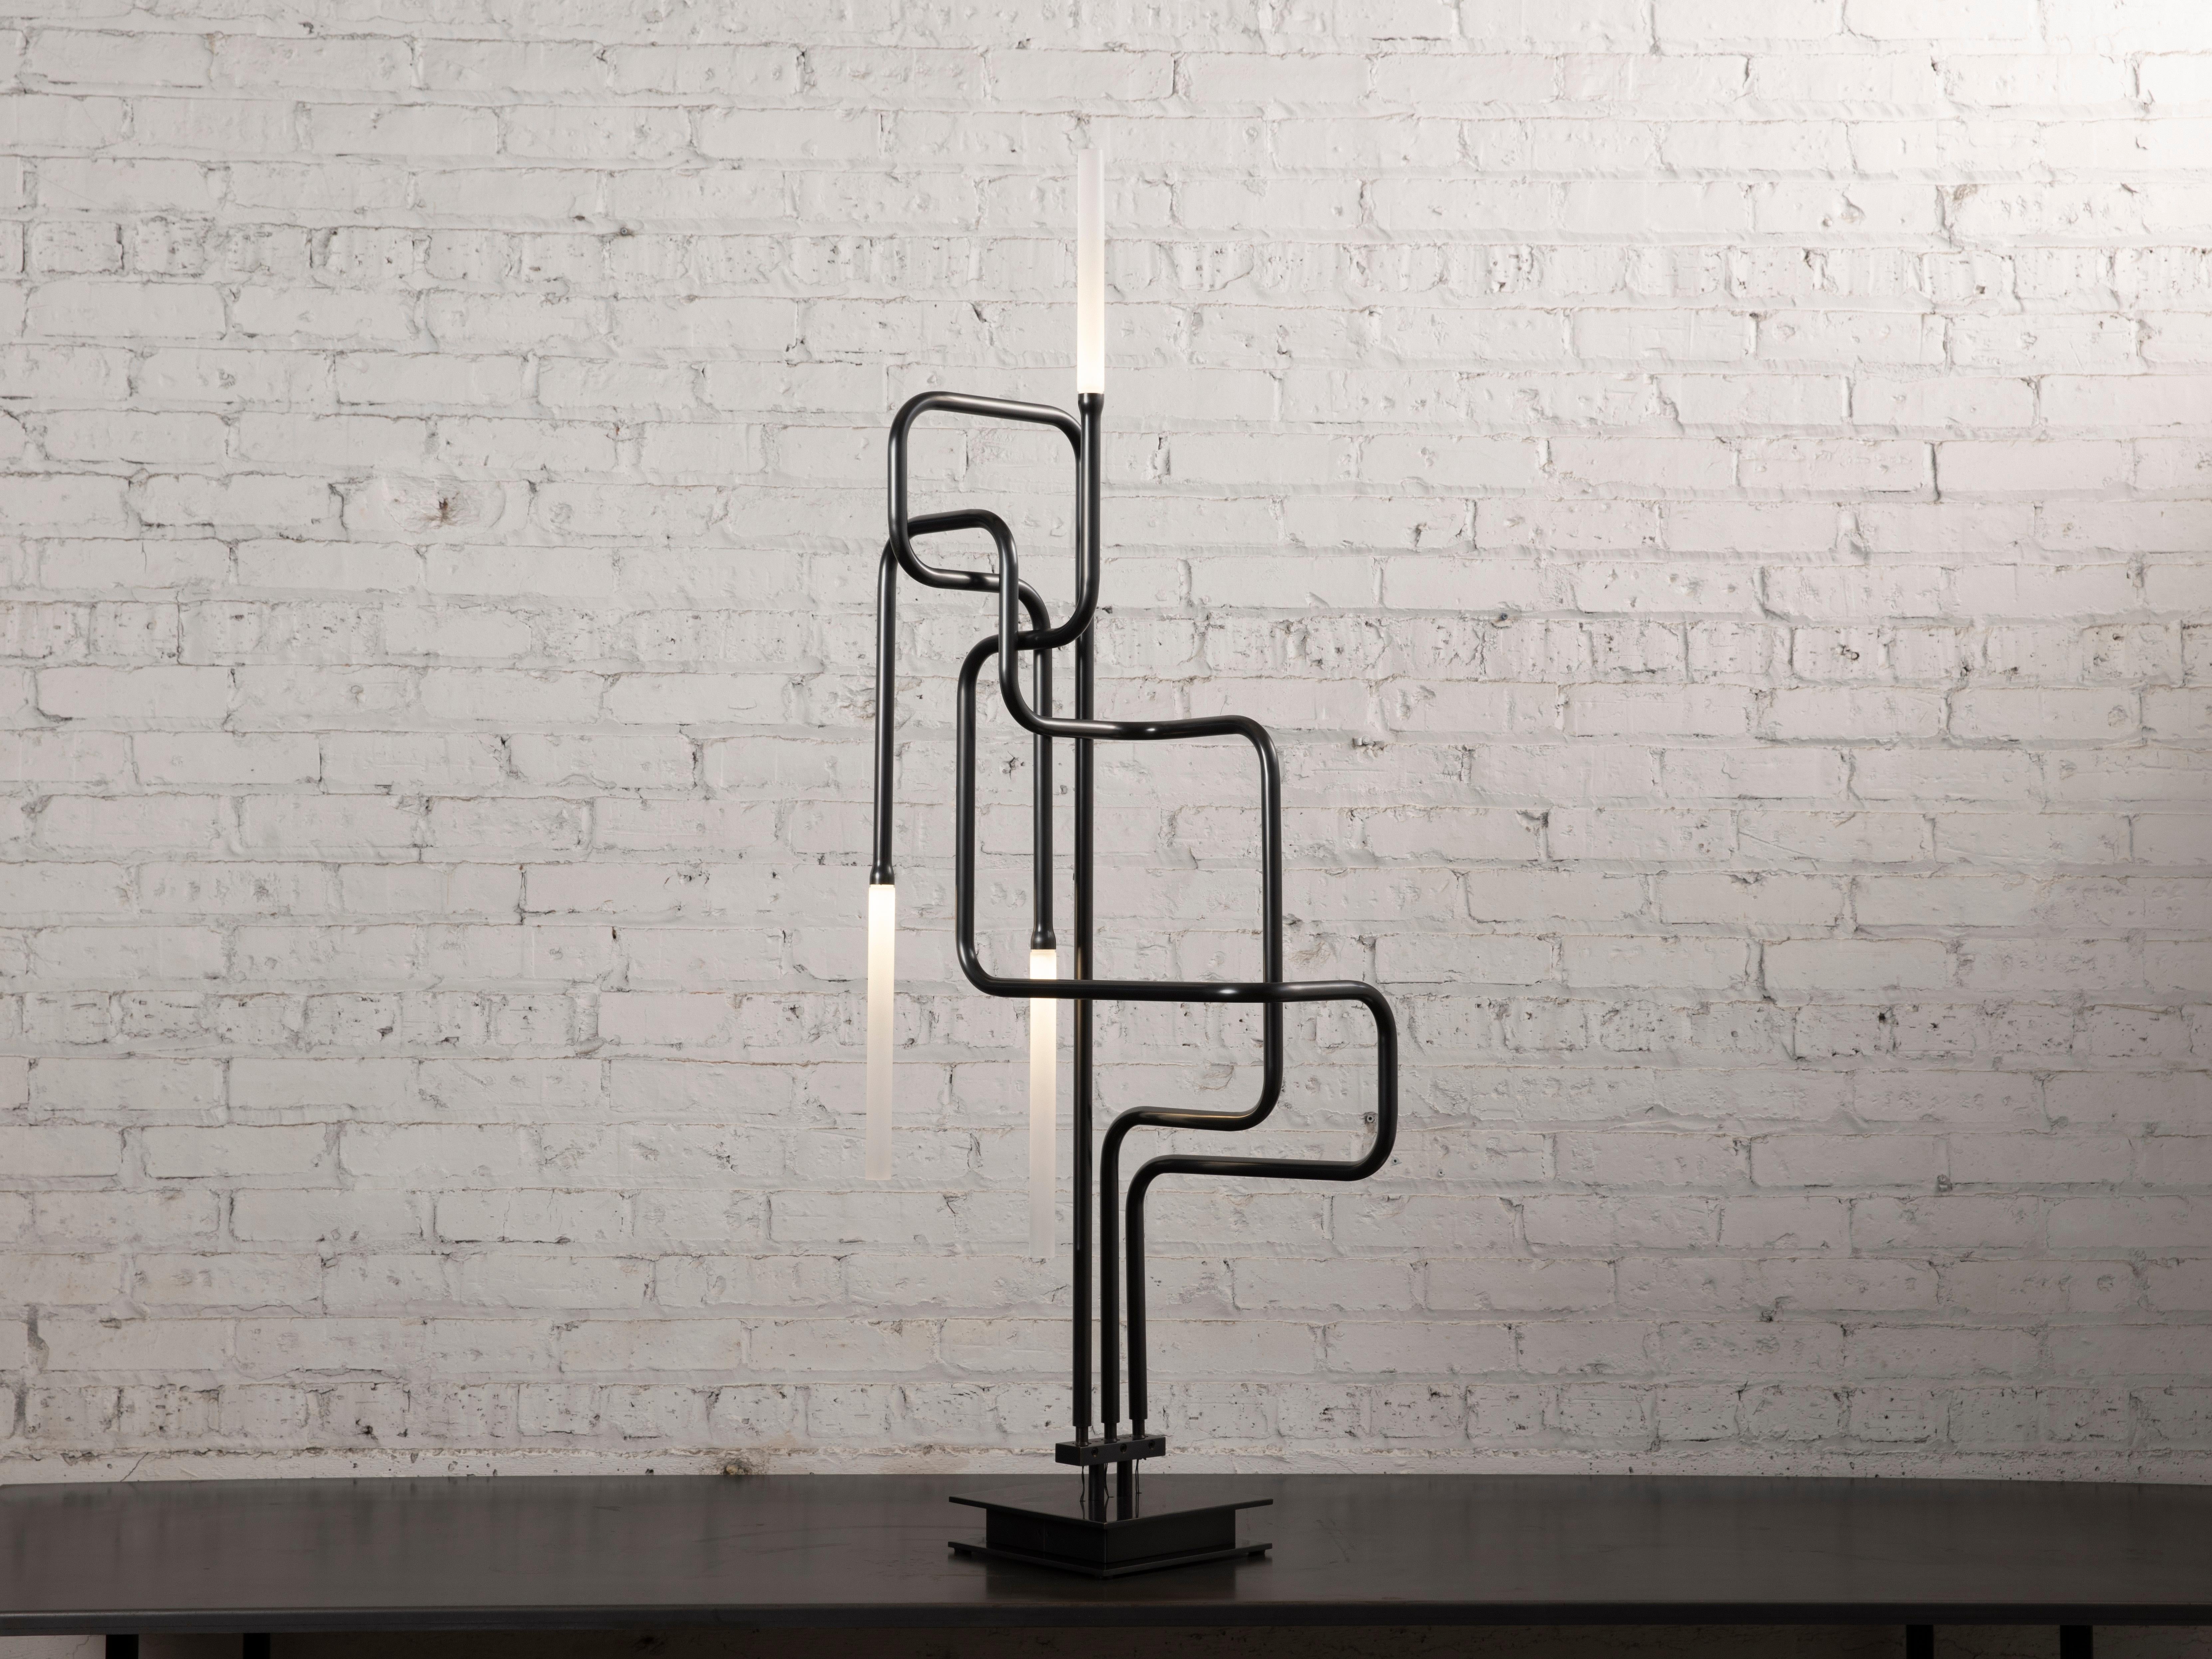 Canal Table Lamp by Gentner Design
Dimensions: D 33 x W 50.8 x H 137 cm
Materials: darkened brass

All our lamps can be wired according to each country. If sold to the USA it will be wired for the USA for instance.

Gentner Design
Rooted in a